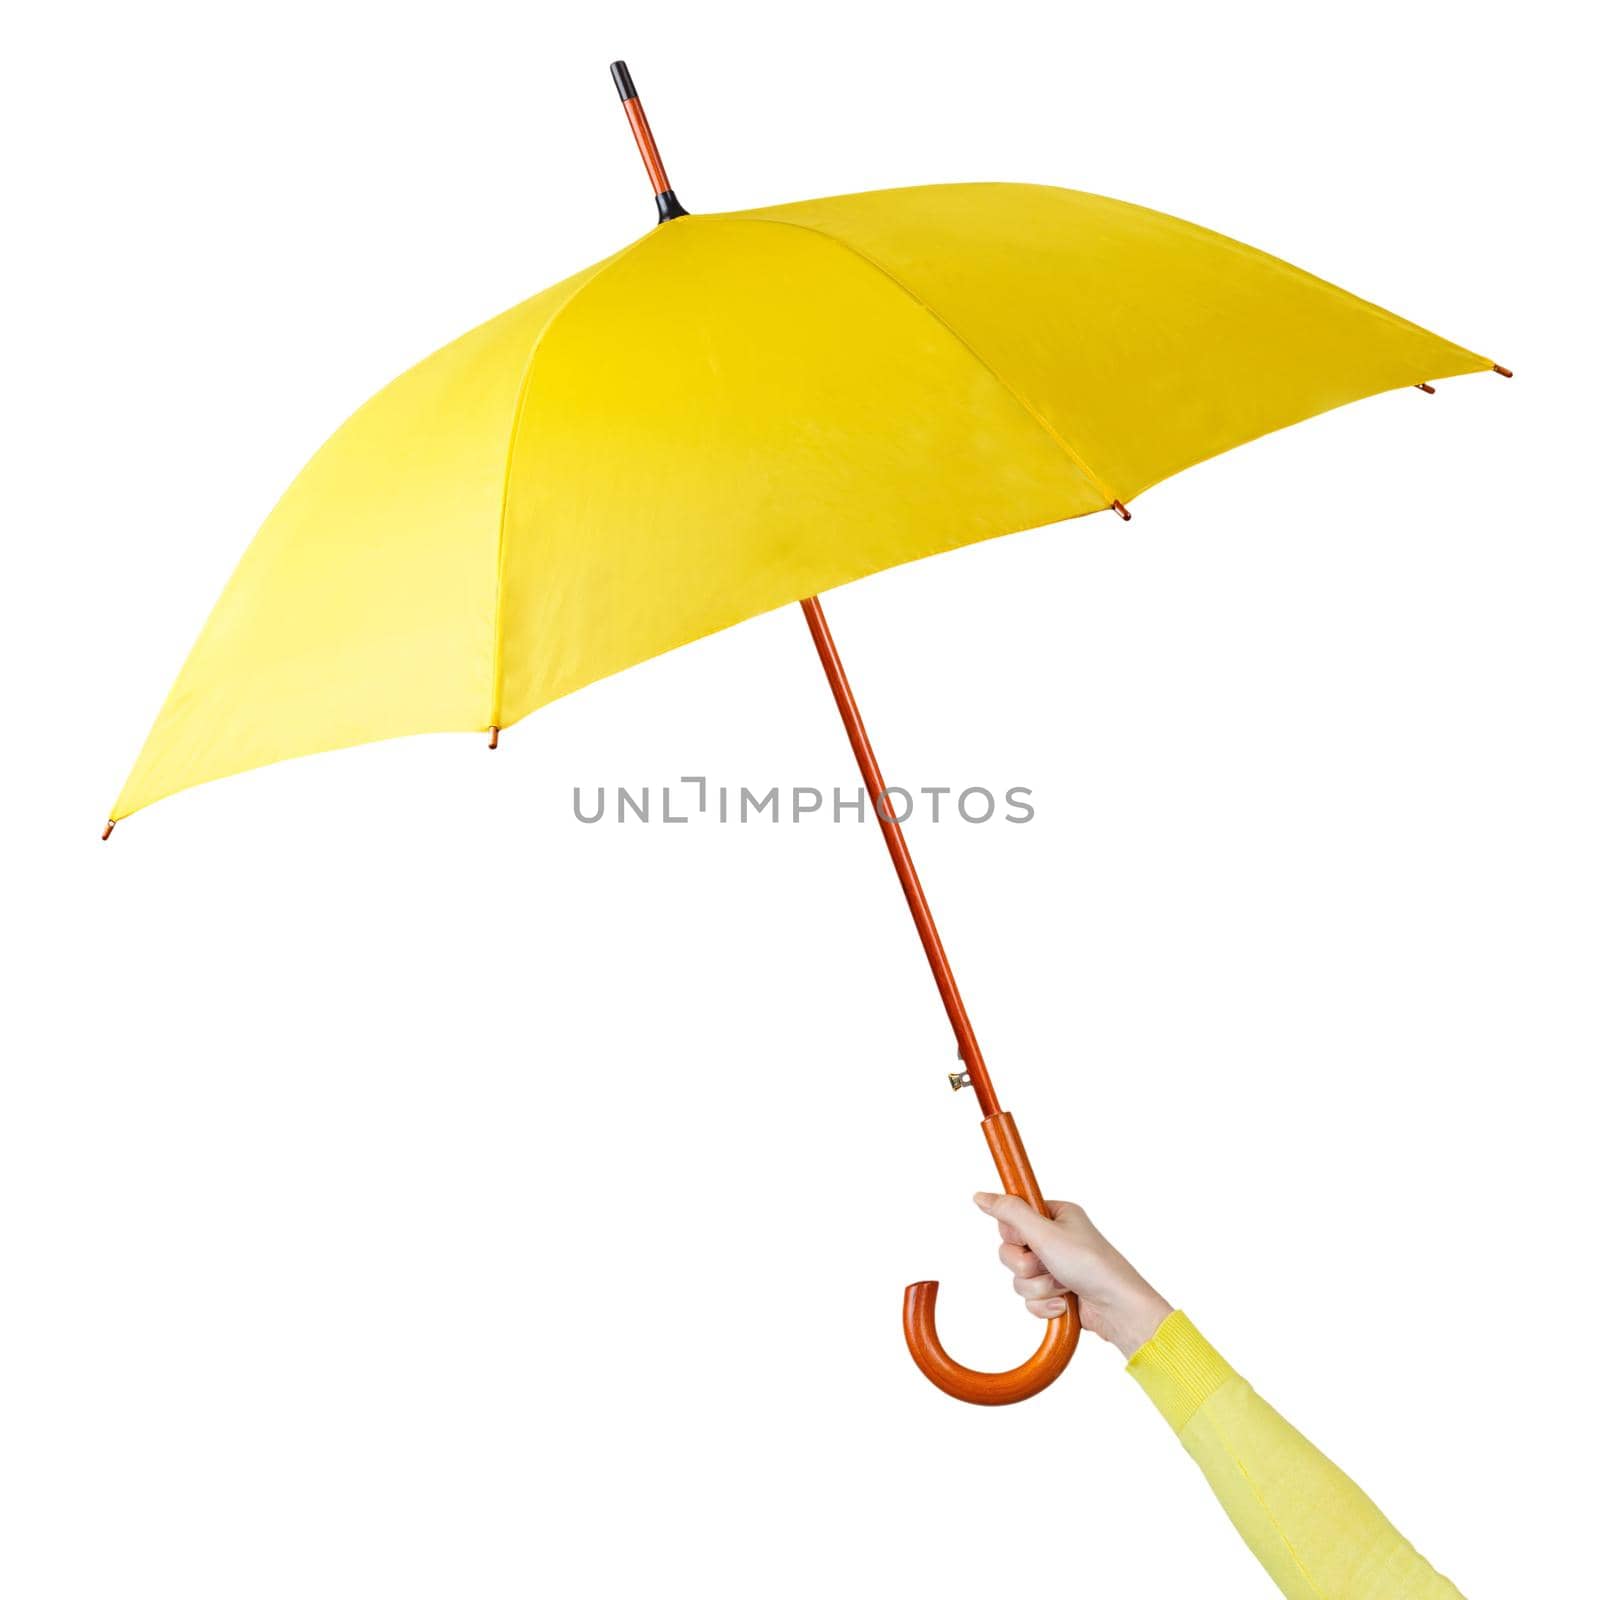 Hand holding a yellow umbrella isolated on white background by dmitryz